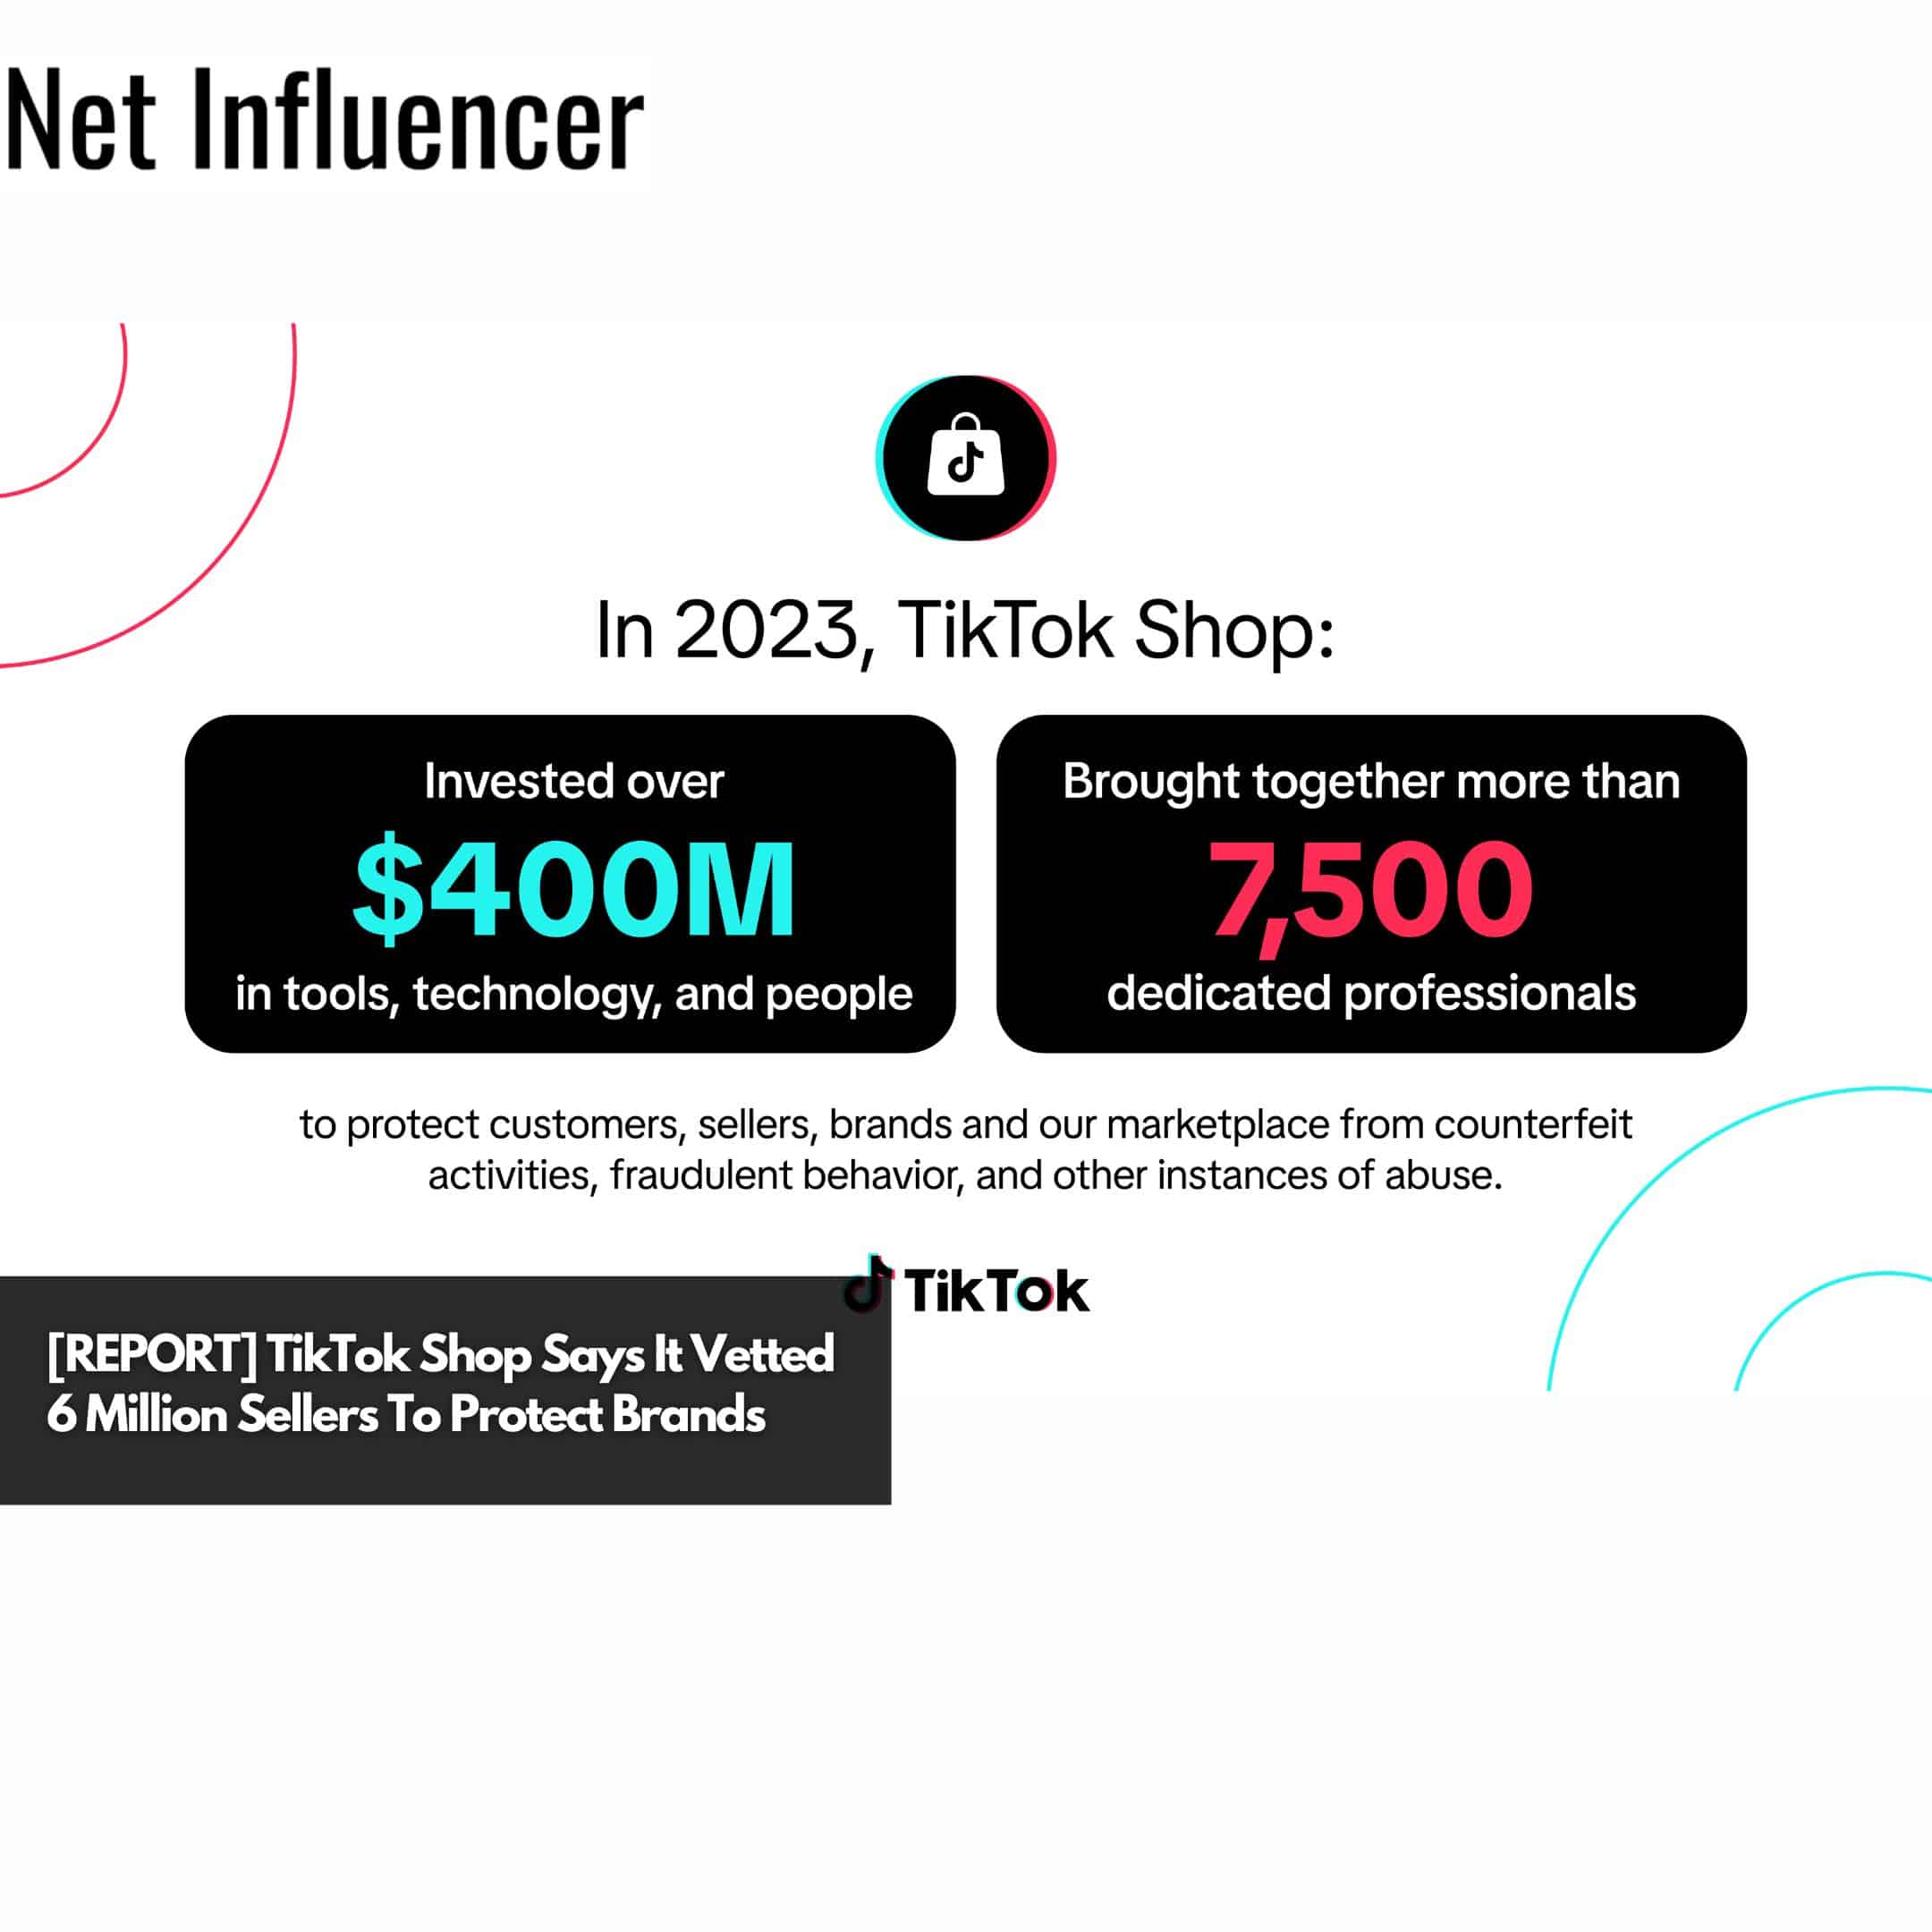 [REPORT] TikTok Shop Says It Vetted 6 Million Sellers To Protect Brands (1)